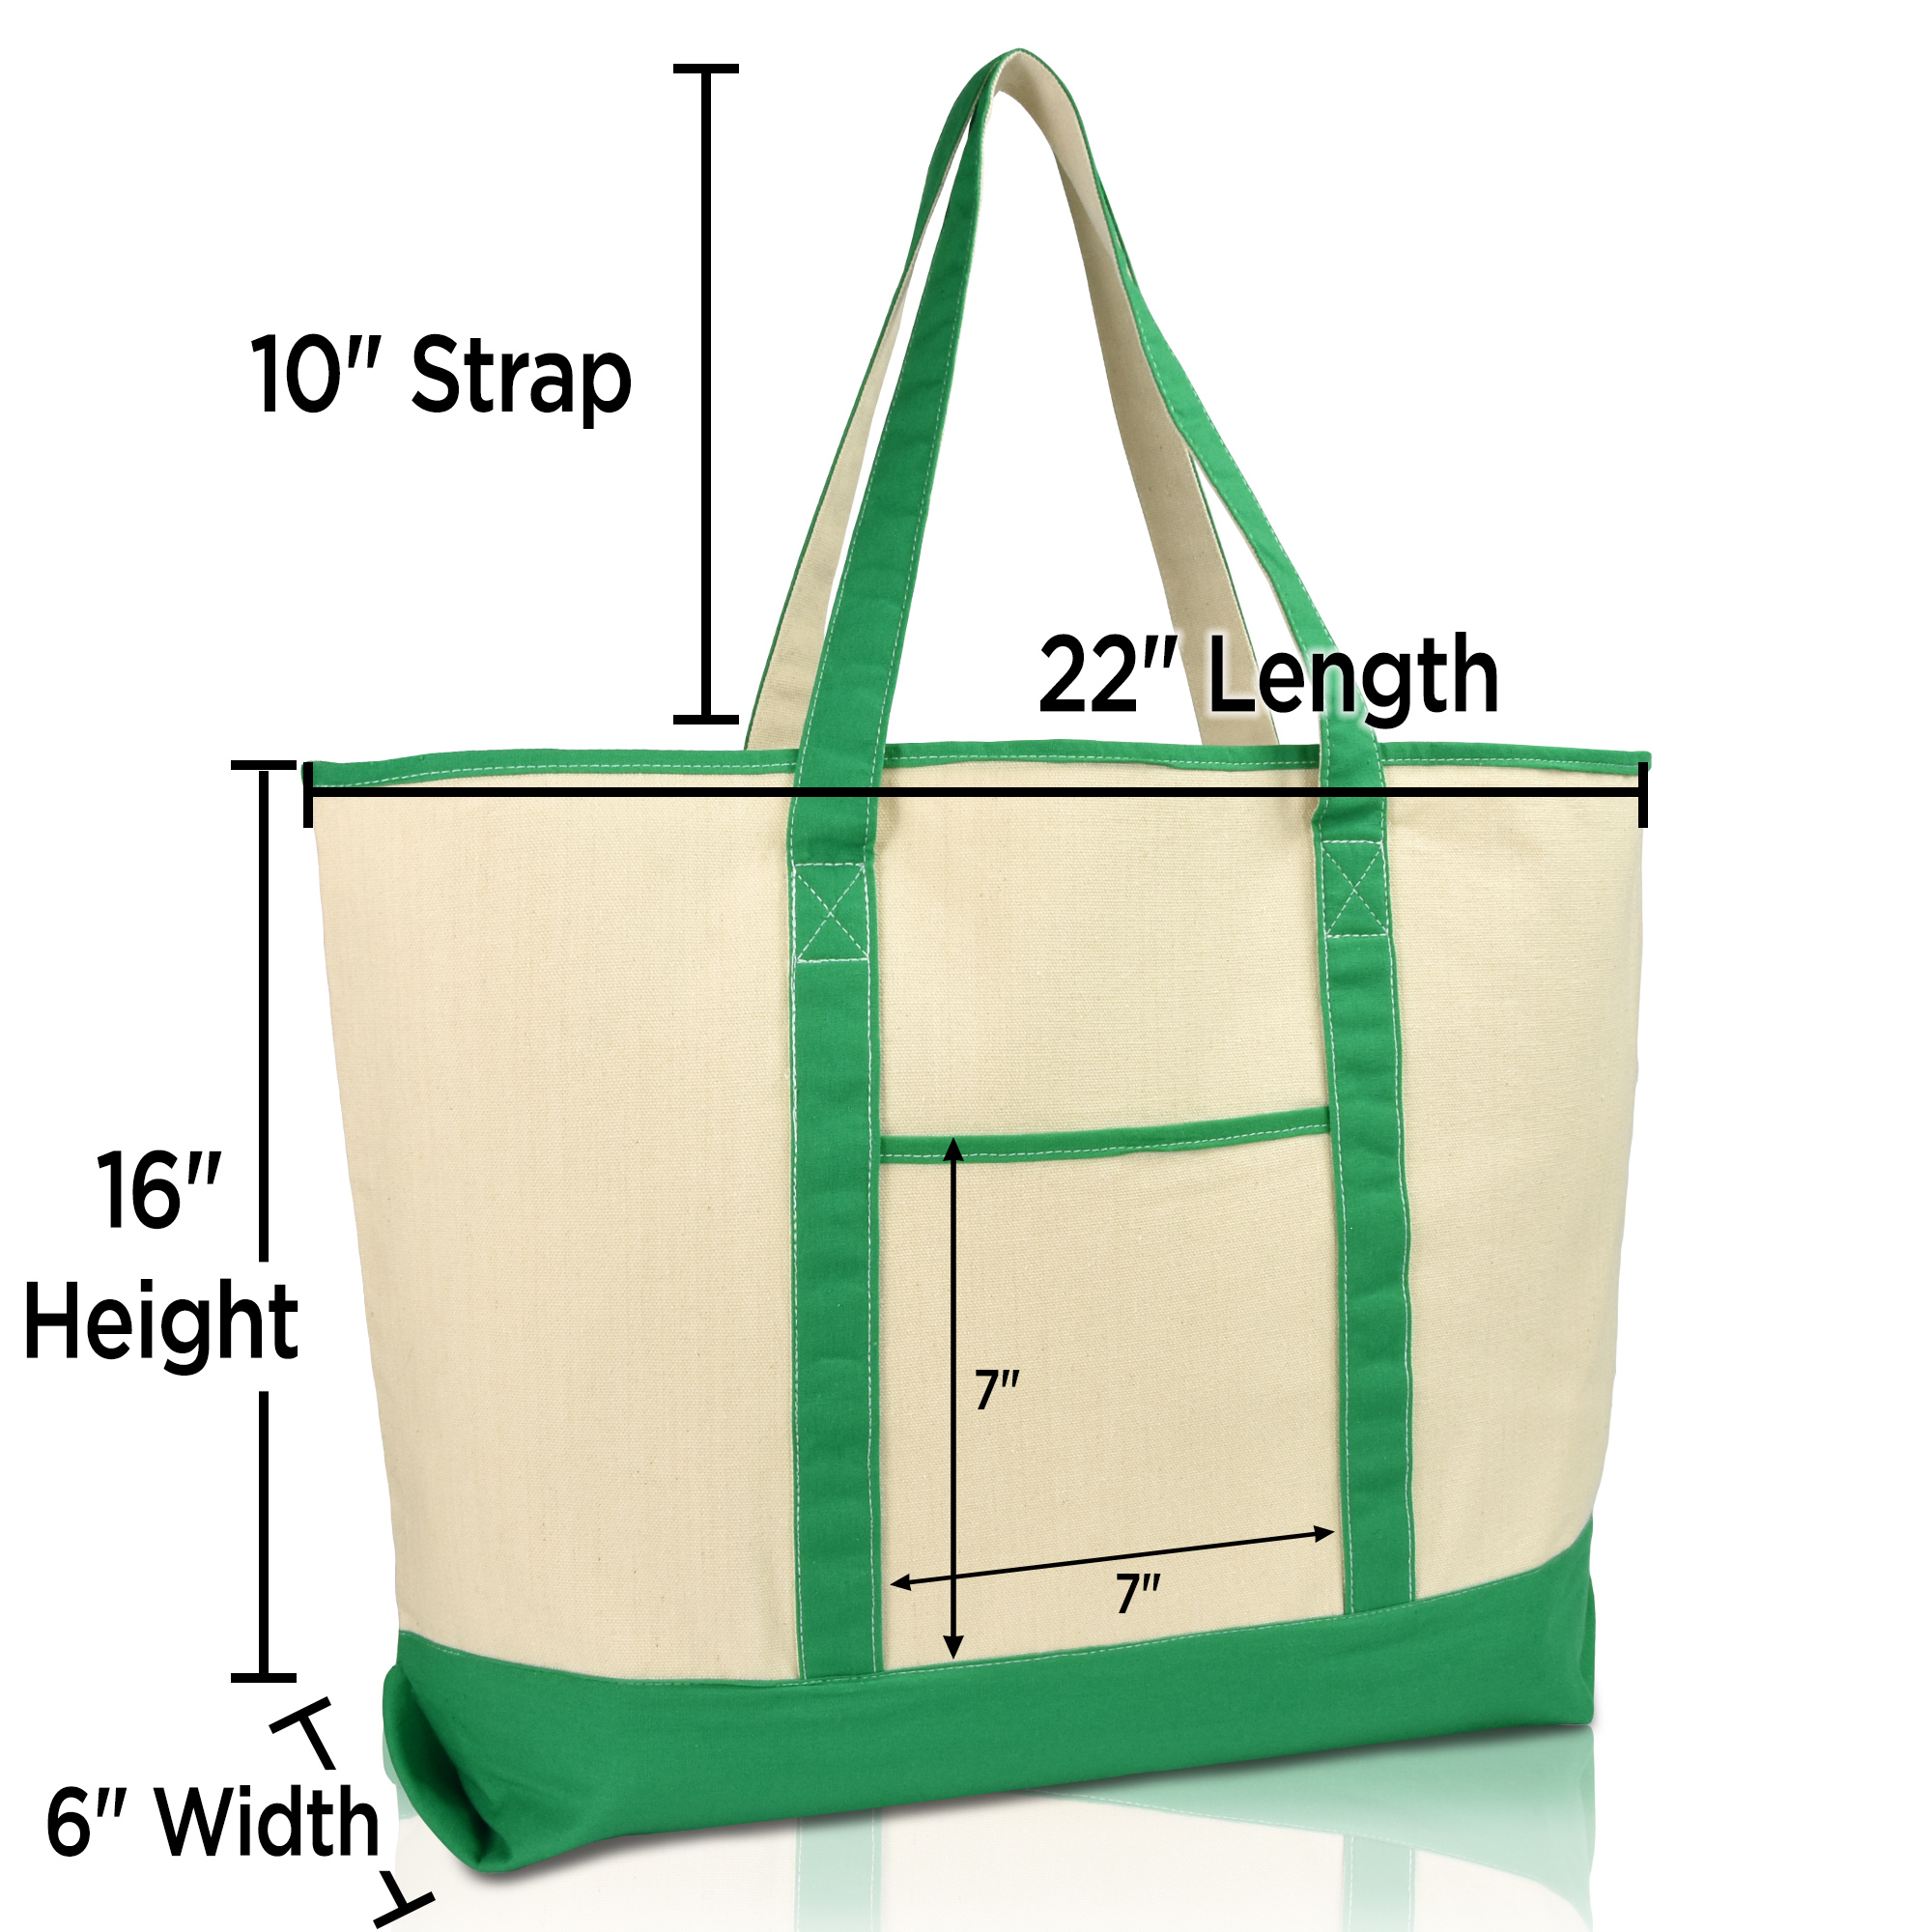 DALIX 22" Open Top Deluxe Tote Bag with Outer Pocket in Dark Green - image 3 of 5